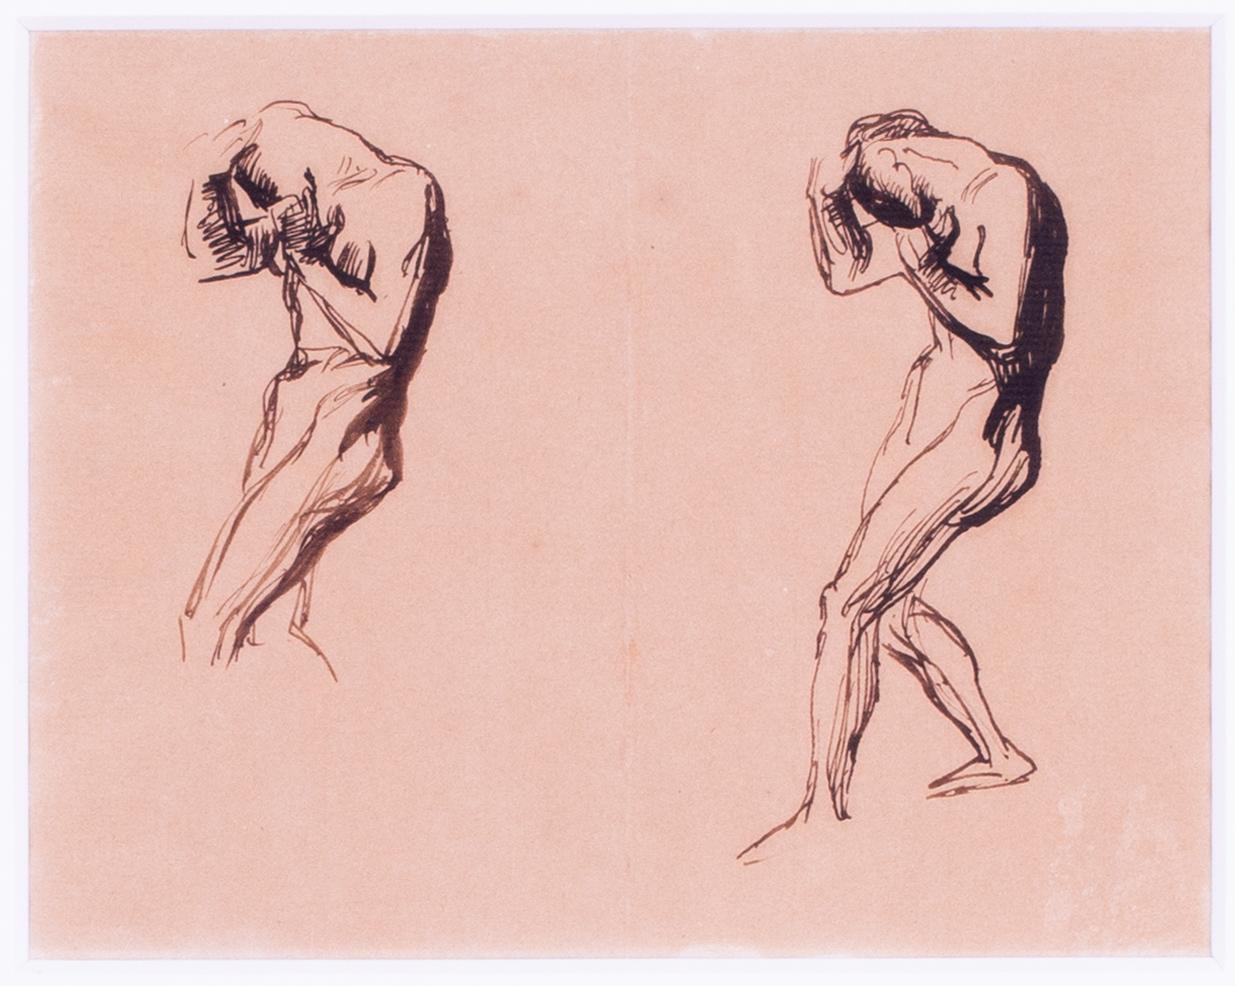 George Frederic Watts OM RA (British, 1817 – 1904)
Studies of Mischief, circa 1873
Pen and brown ink on paper
6.1/2 x 8.3/8 in. (16.5 x 21.3 cm.)
Provenance: From the private estate of David Loshak, writer, lecturer, professor of Art History, and